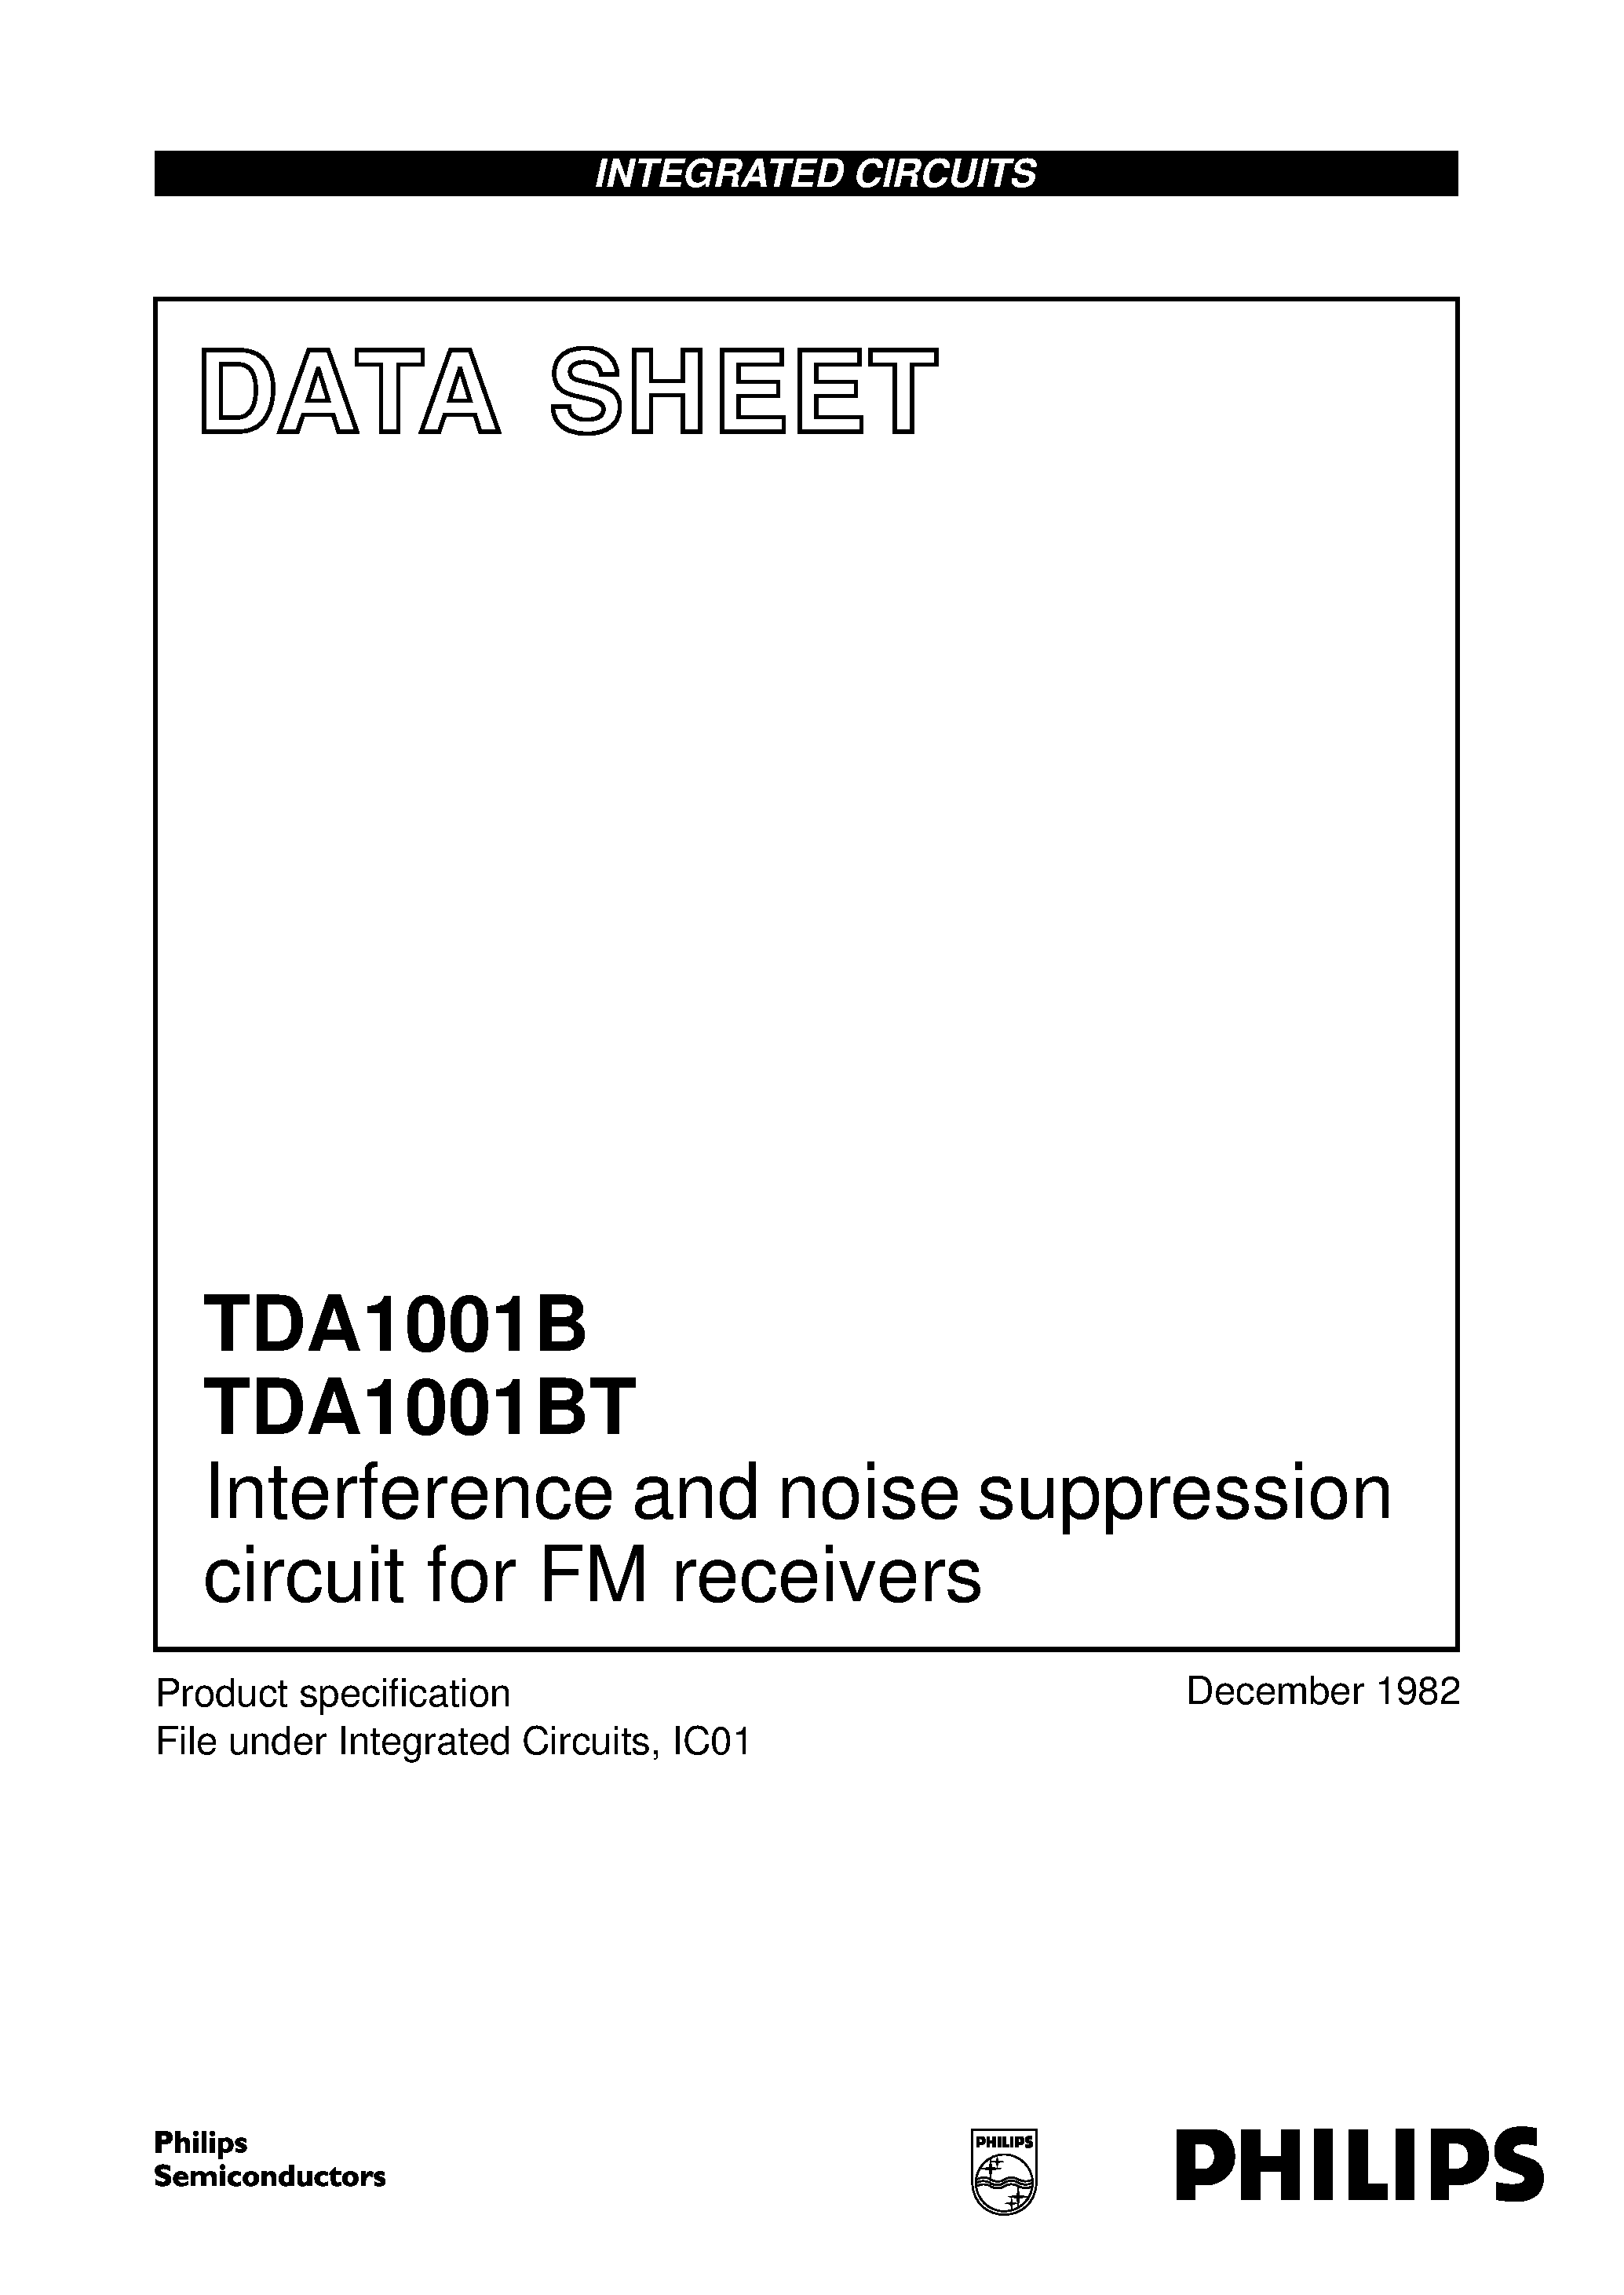 Даташит TDA1001B - Interference and noise suppression circuit for FM receivers страница 1